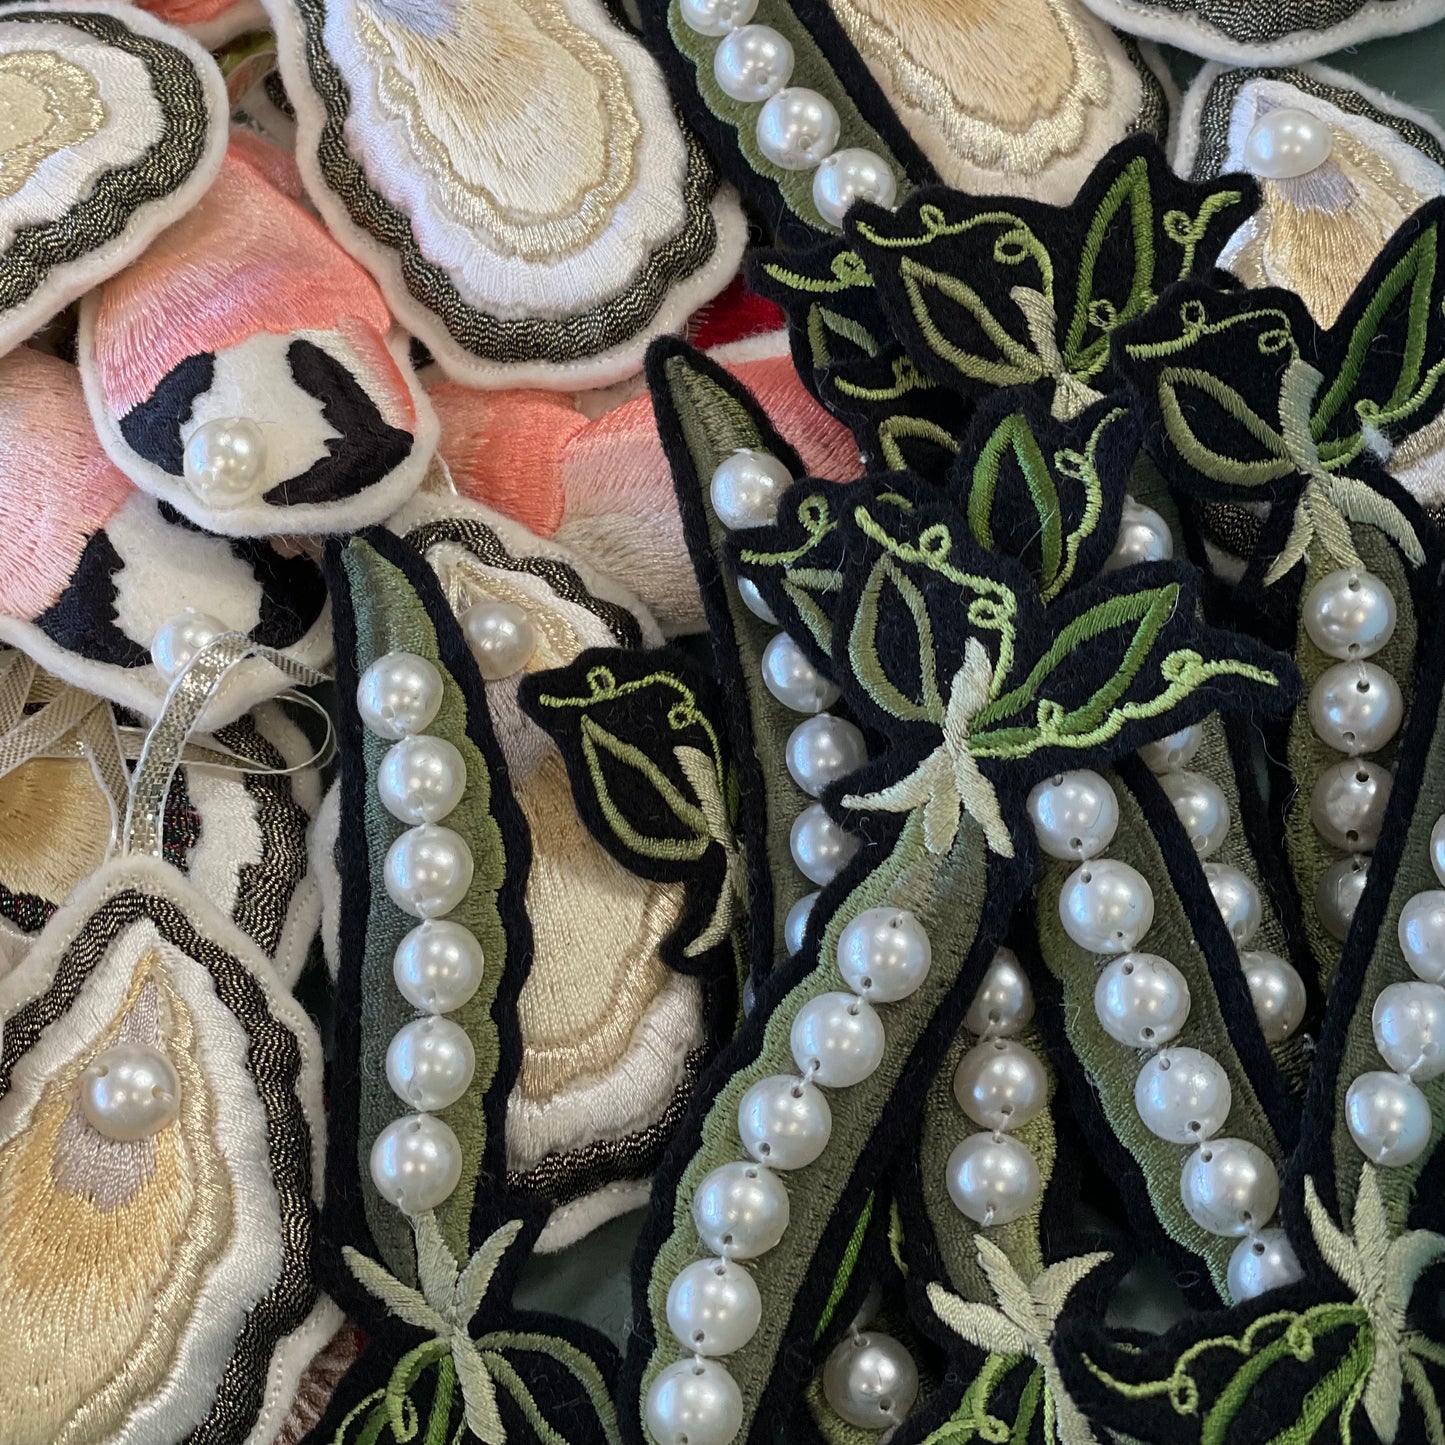 A selection of Ellie Mac embroidered patches. Embroidered crab claws and oysters can be seen in the background with the embroidered peas on top